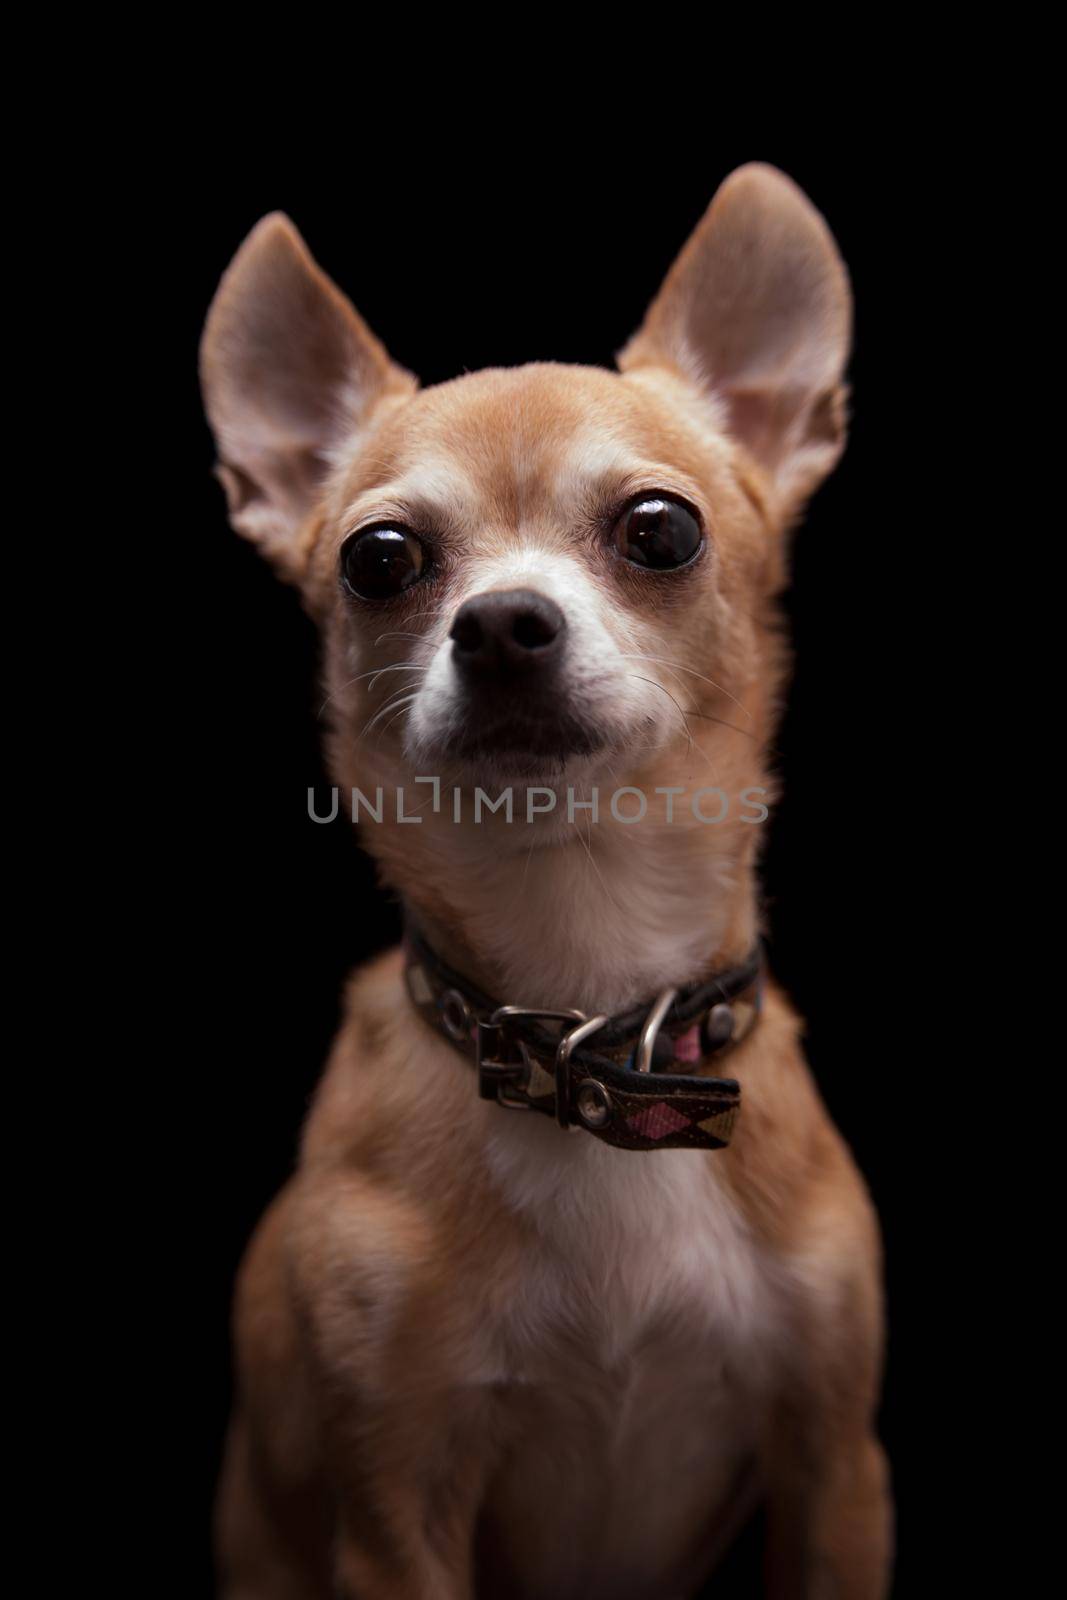 Chihuahua, 11 years old, on the black background by RosaJay